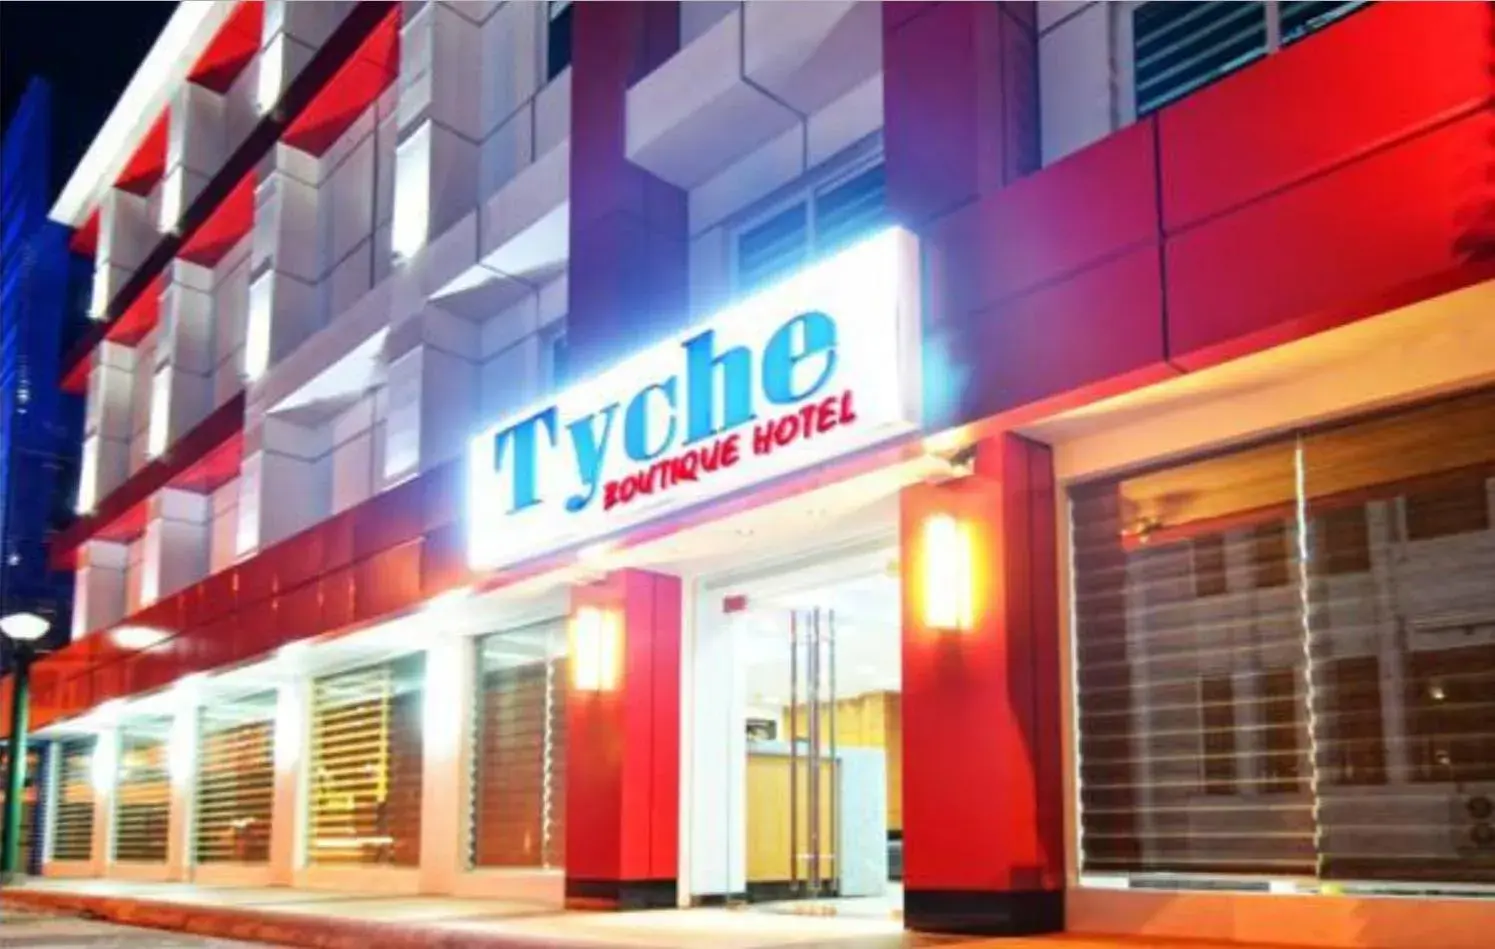 Property building in Tyche Boutique Hotel